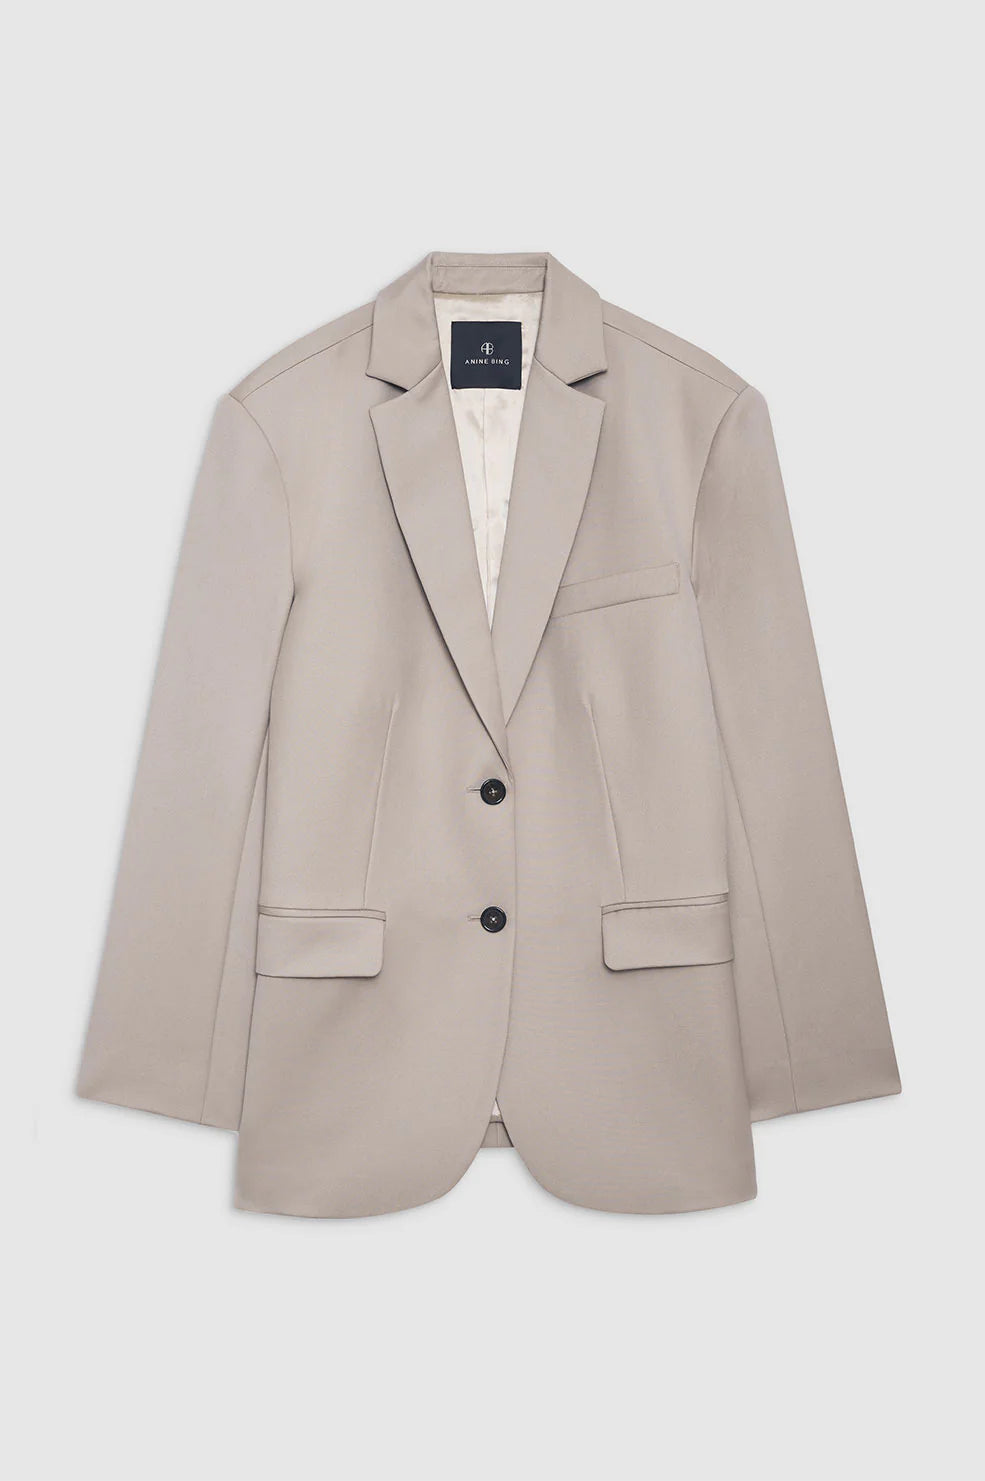 Quinn Blazer in Taupe by Anine Bing